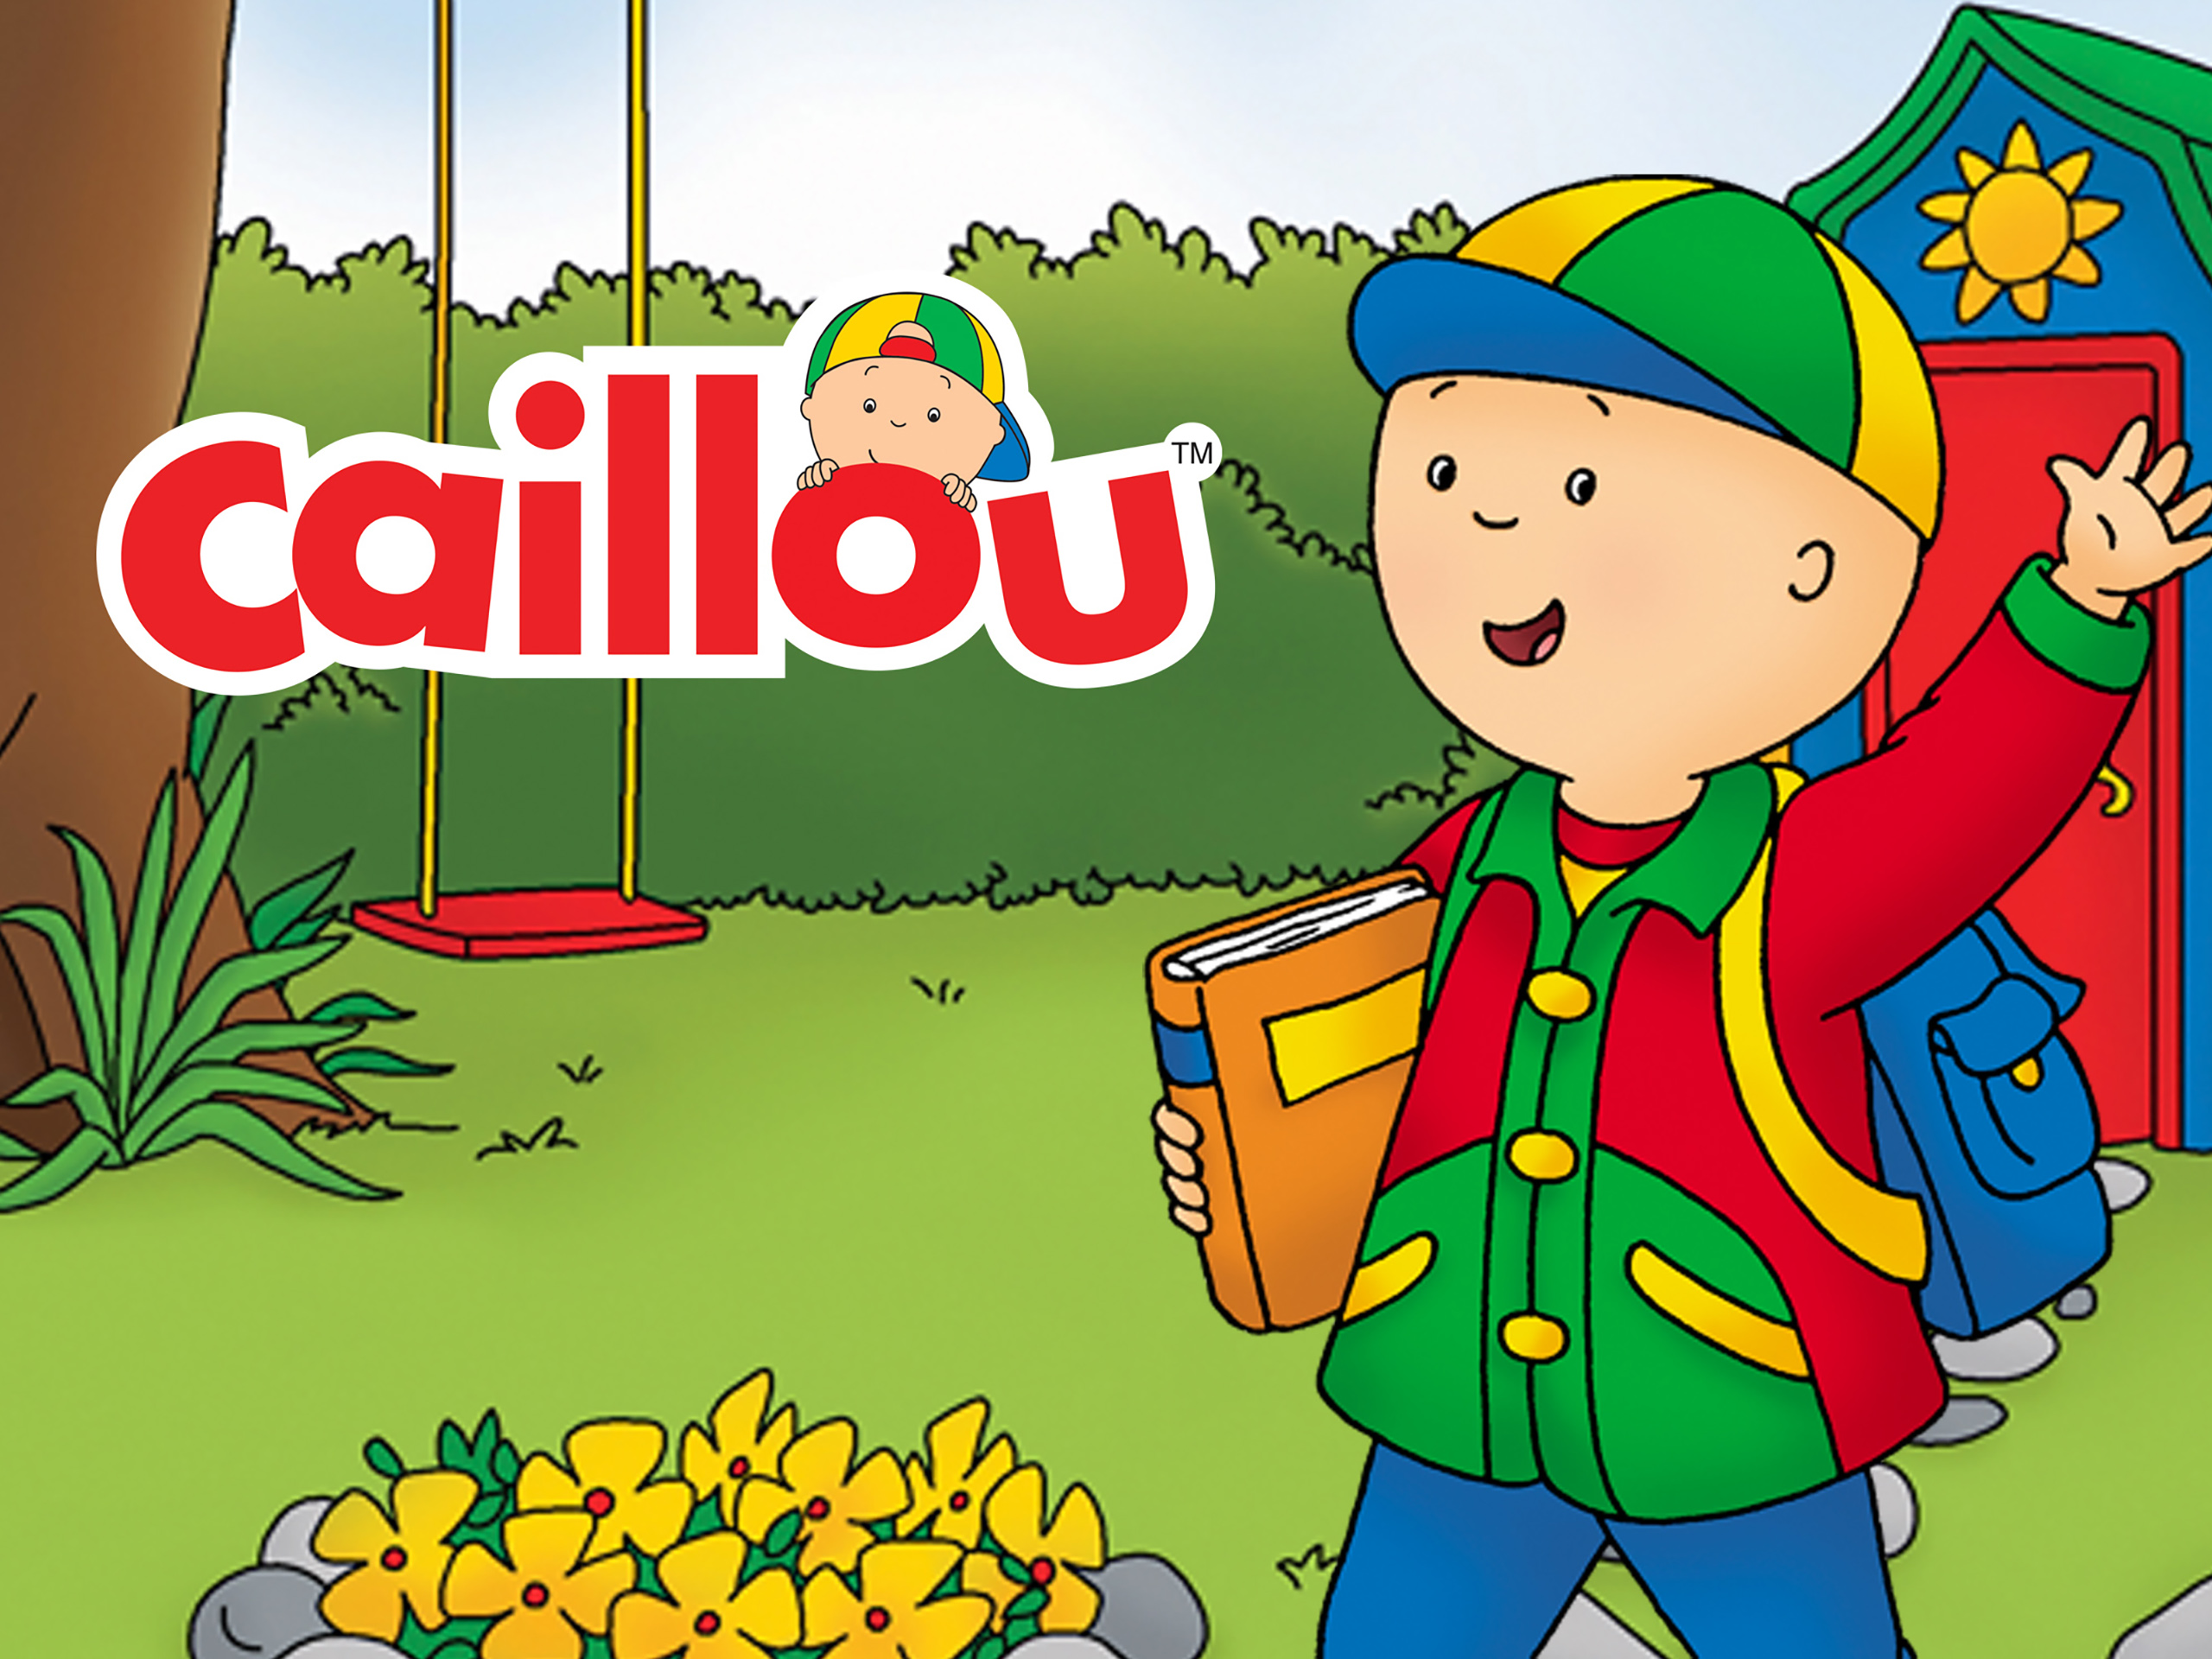 Caillou Returning In Canada By WildBrain Television After PBS Cancellation!